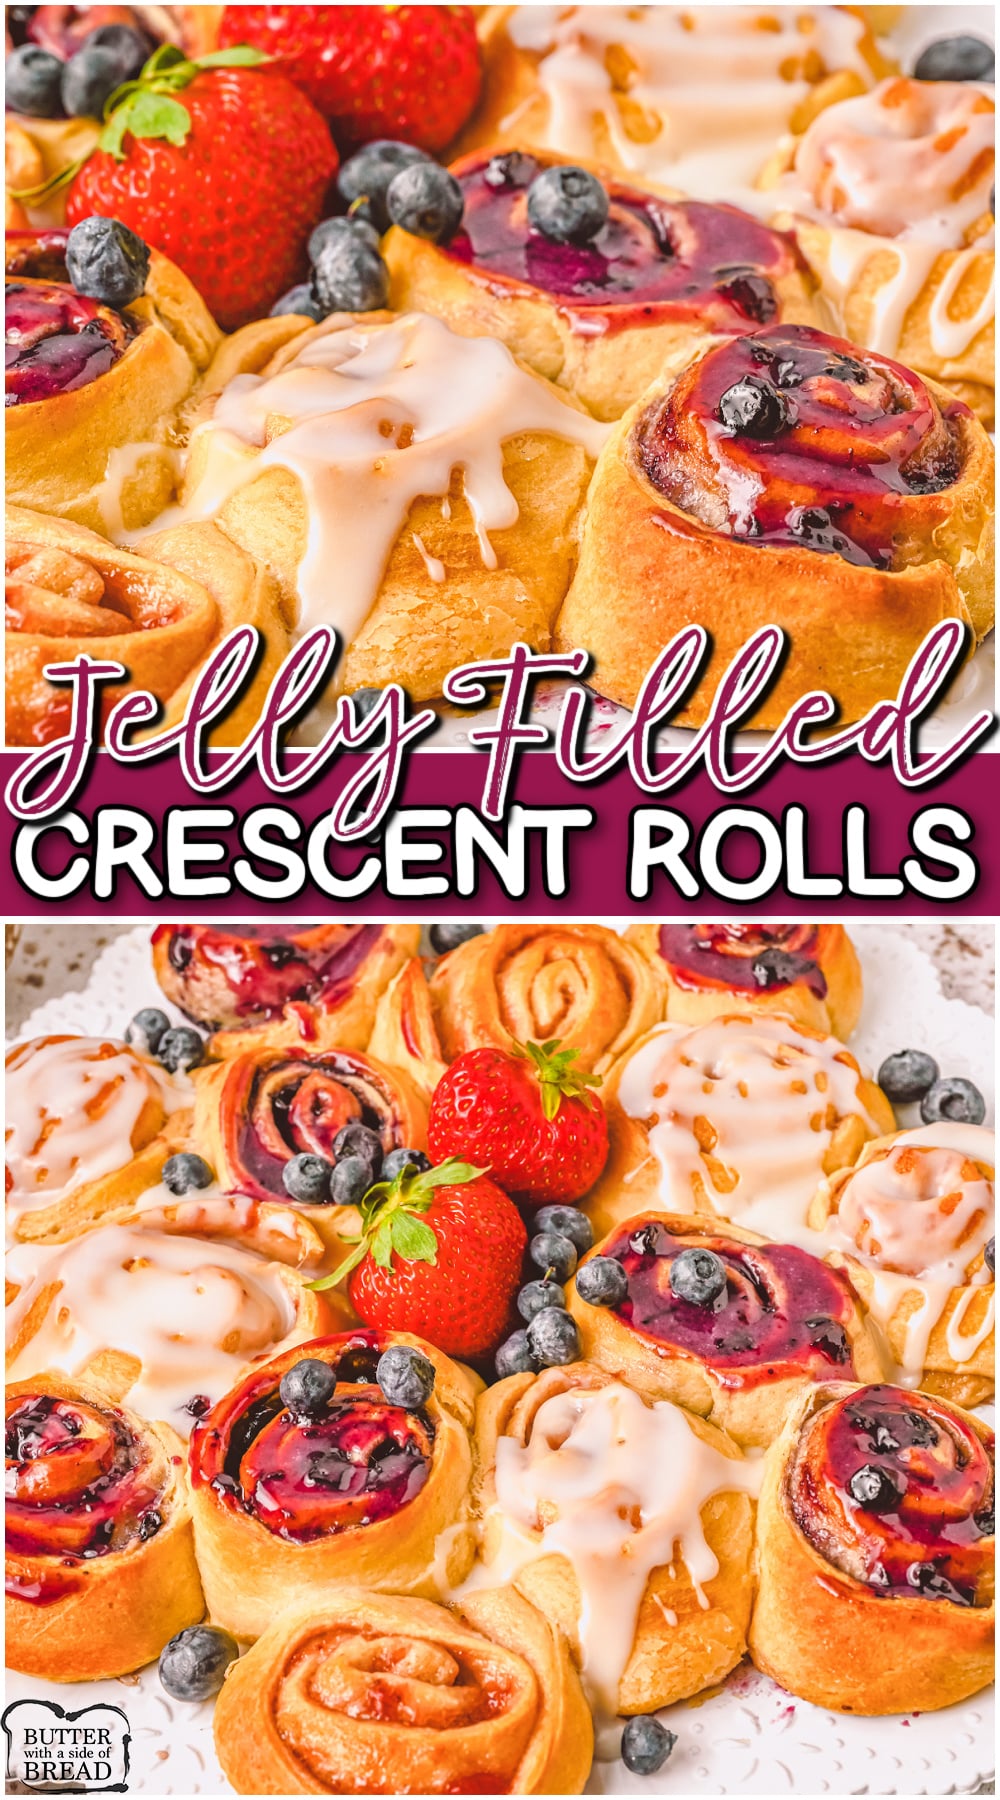 Jelly Filled Crescent Rolls made with 6 ingredients in just 30 minutes! Fruity crescents made with strawberry & blueberry jelly & glazed with a simple icing.